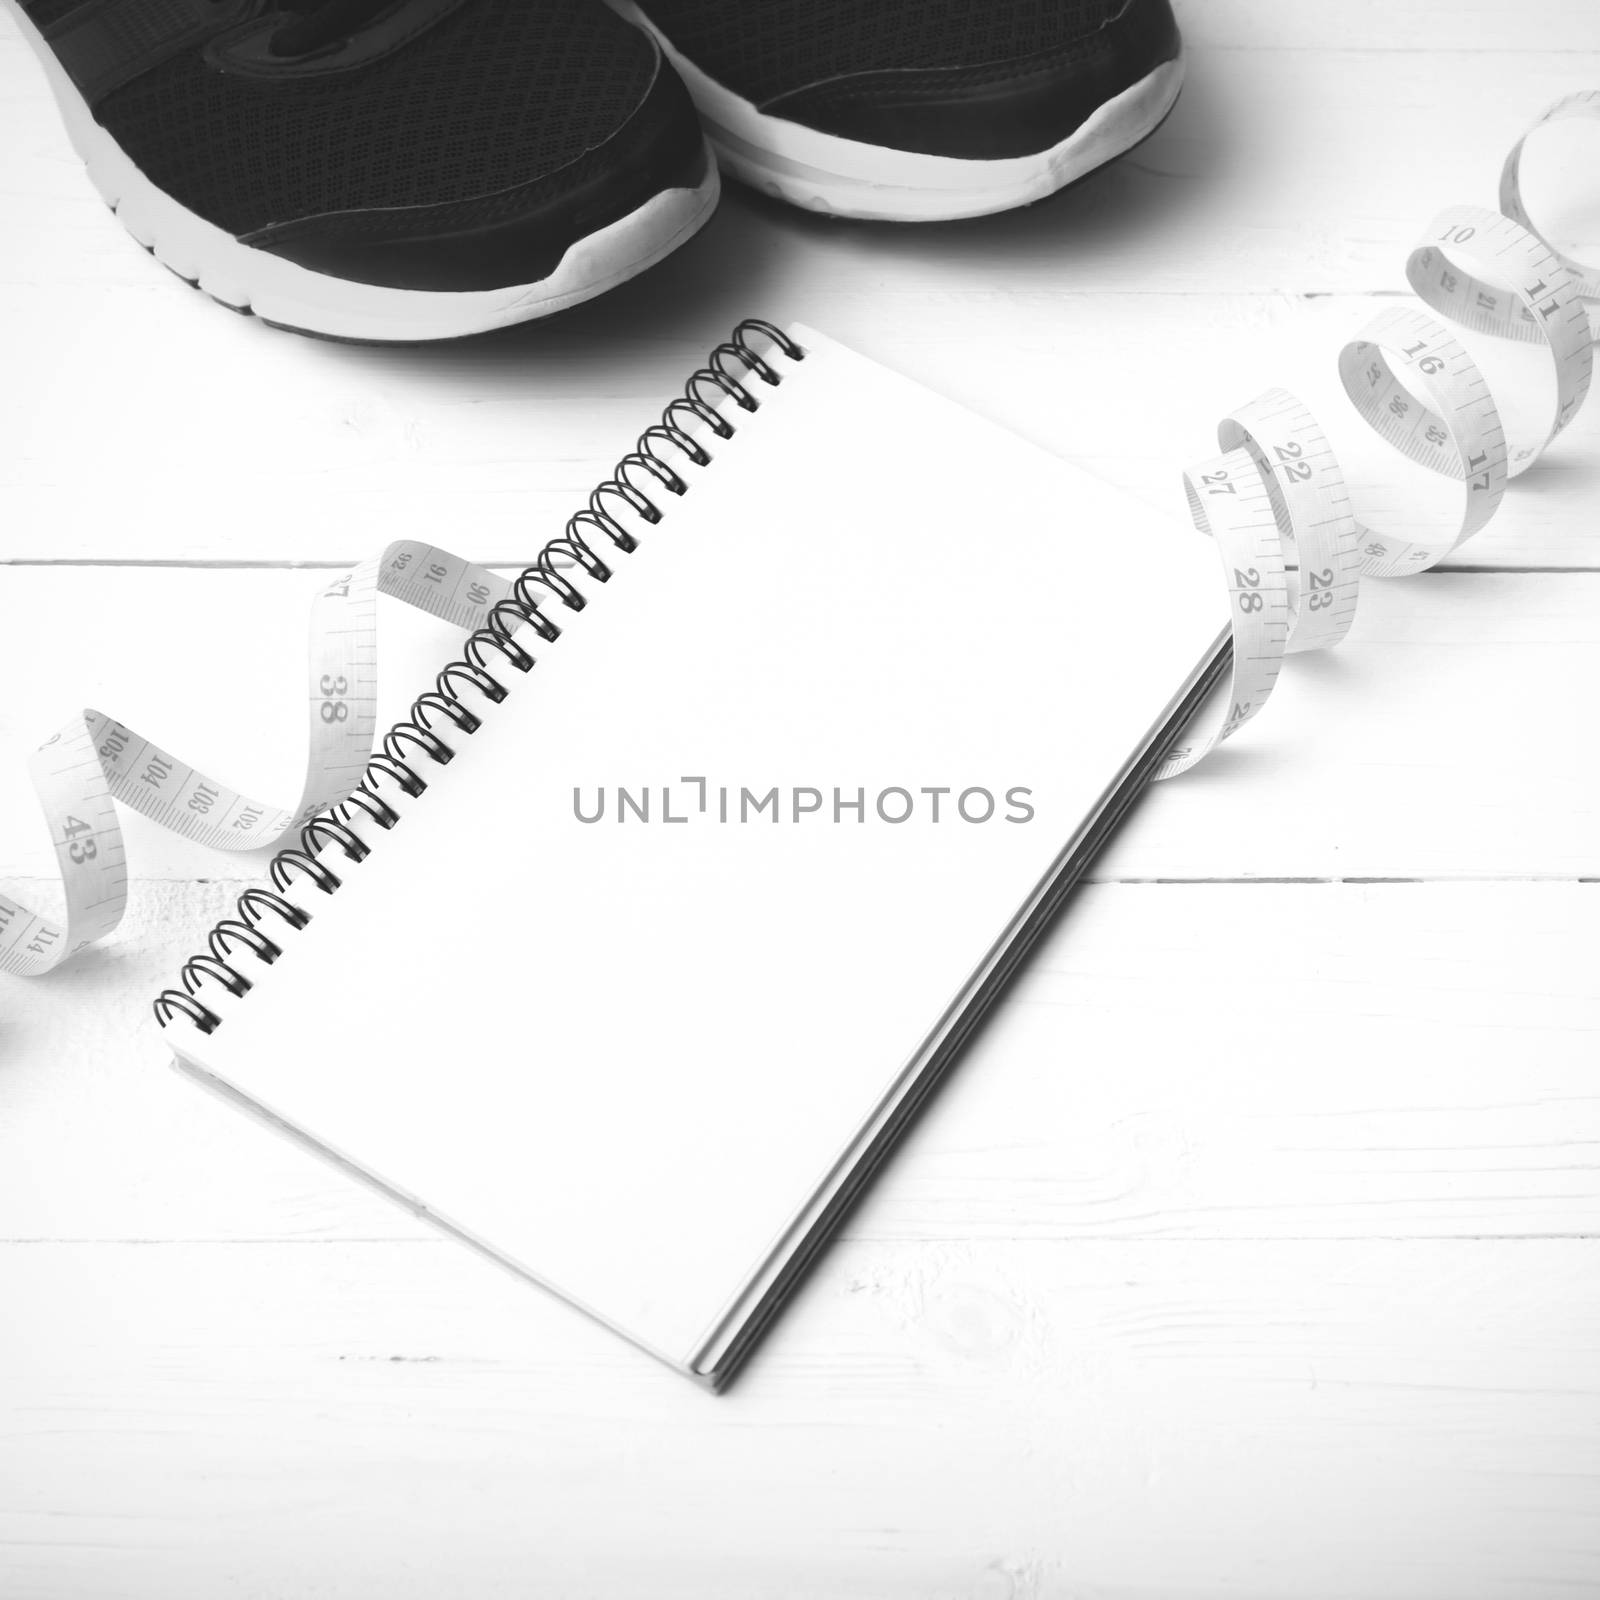 running shoes with notebook and measuring tape on white wood table black and white tone color style